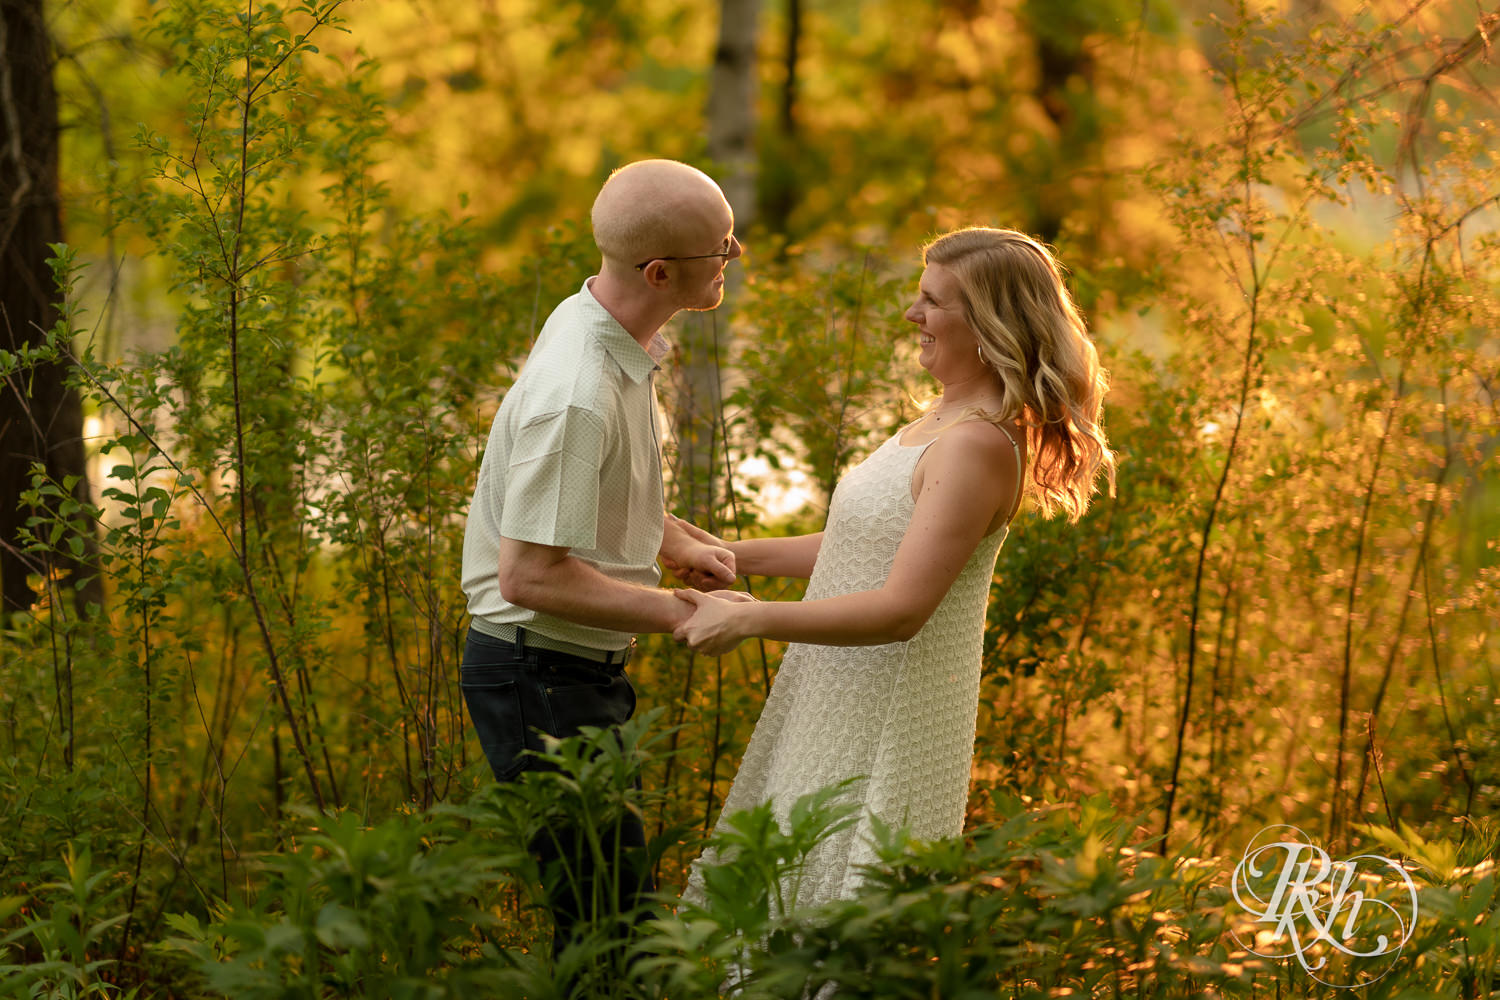 Man in white shirt and blonde woman in white dress and denim smile at sunset in Lebanon Hills Regional Park in Eagan, Minnesota.